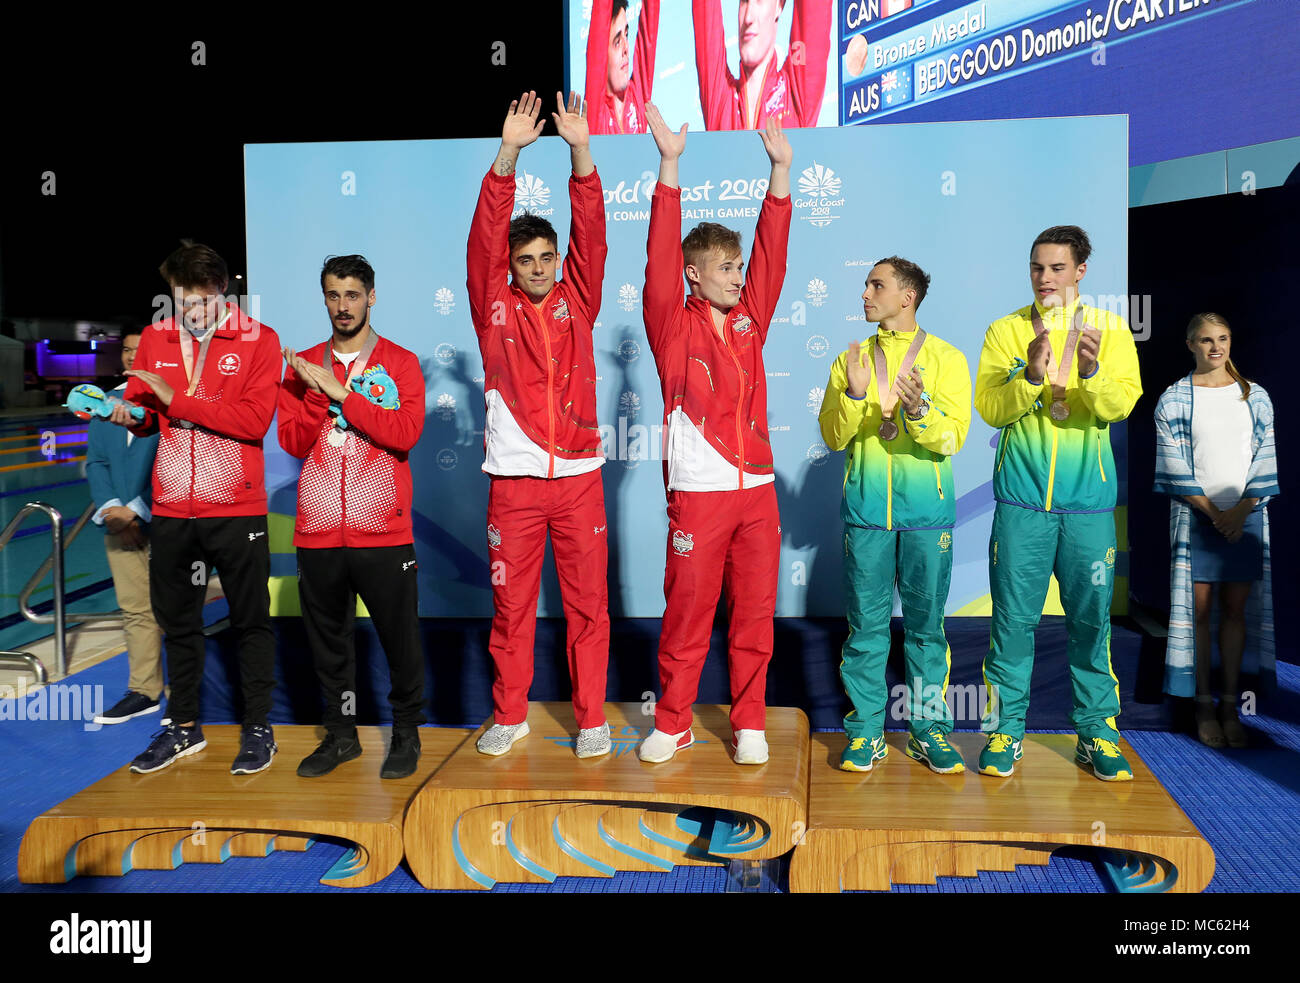 England's England's Jack Laugher (left centre) and Chris Mears celebrate winning gold on the podium, with silver medalists Canada's Philippe Gagne and Francois Imbeau-Dulac (left) and Australia's Matthew Carter and Domonic Bedggood at the Optus Aquatic Centre during day nine of the 2018 Commonwealth Games in the Gold Coast, Australia. Stock Photo